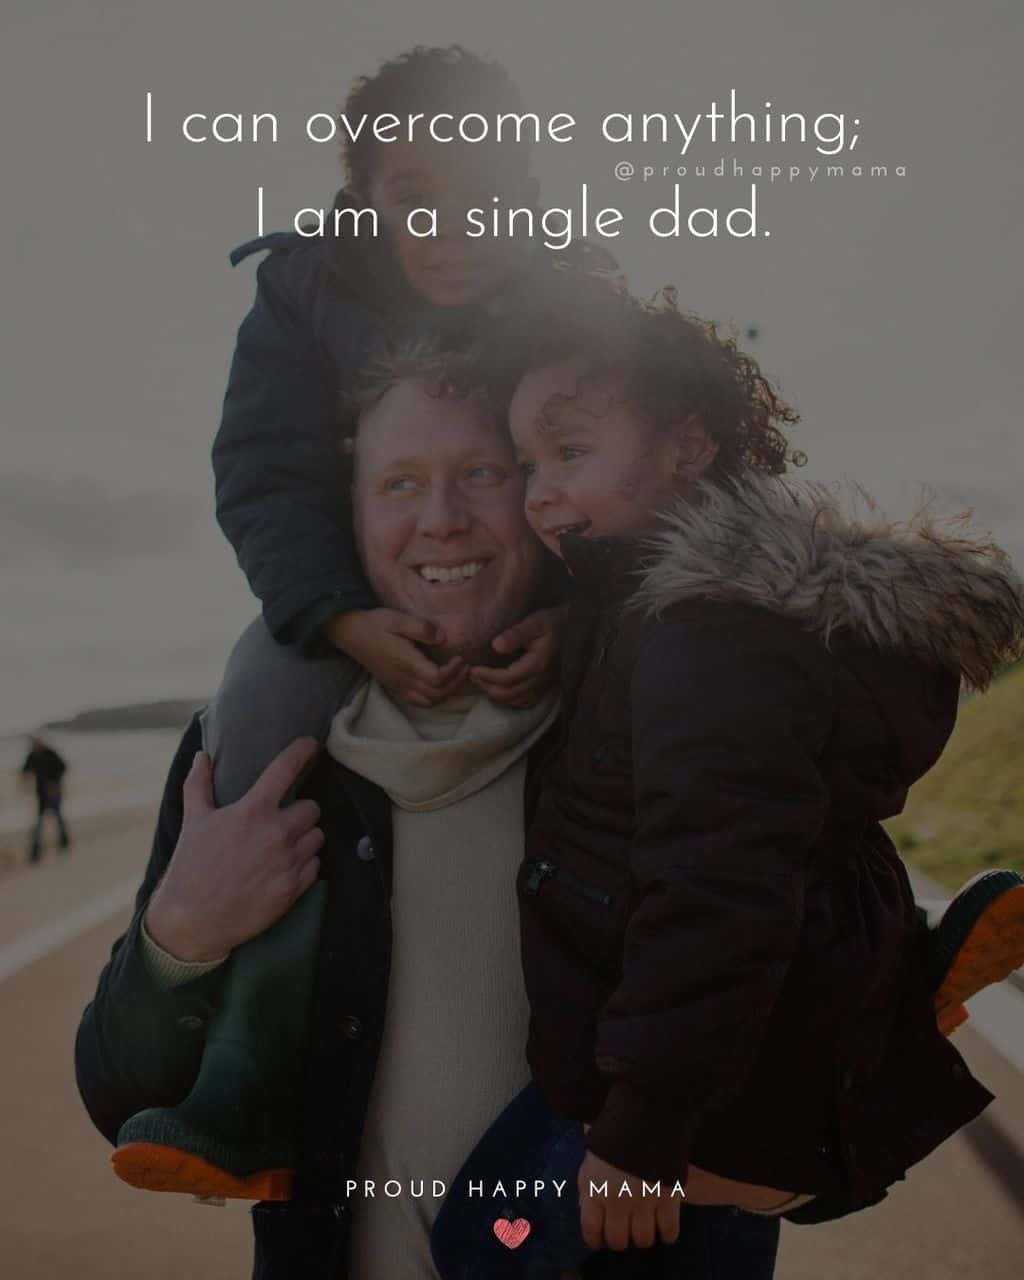 30+ Inspirational Single Dad Quotes For Single Fathers [With Images]